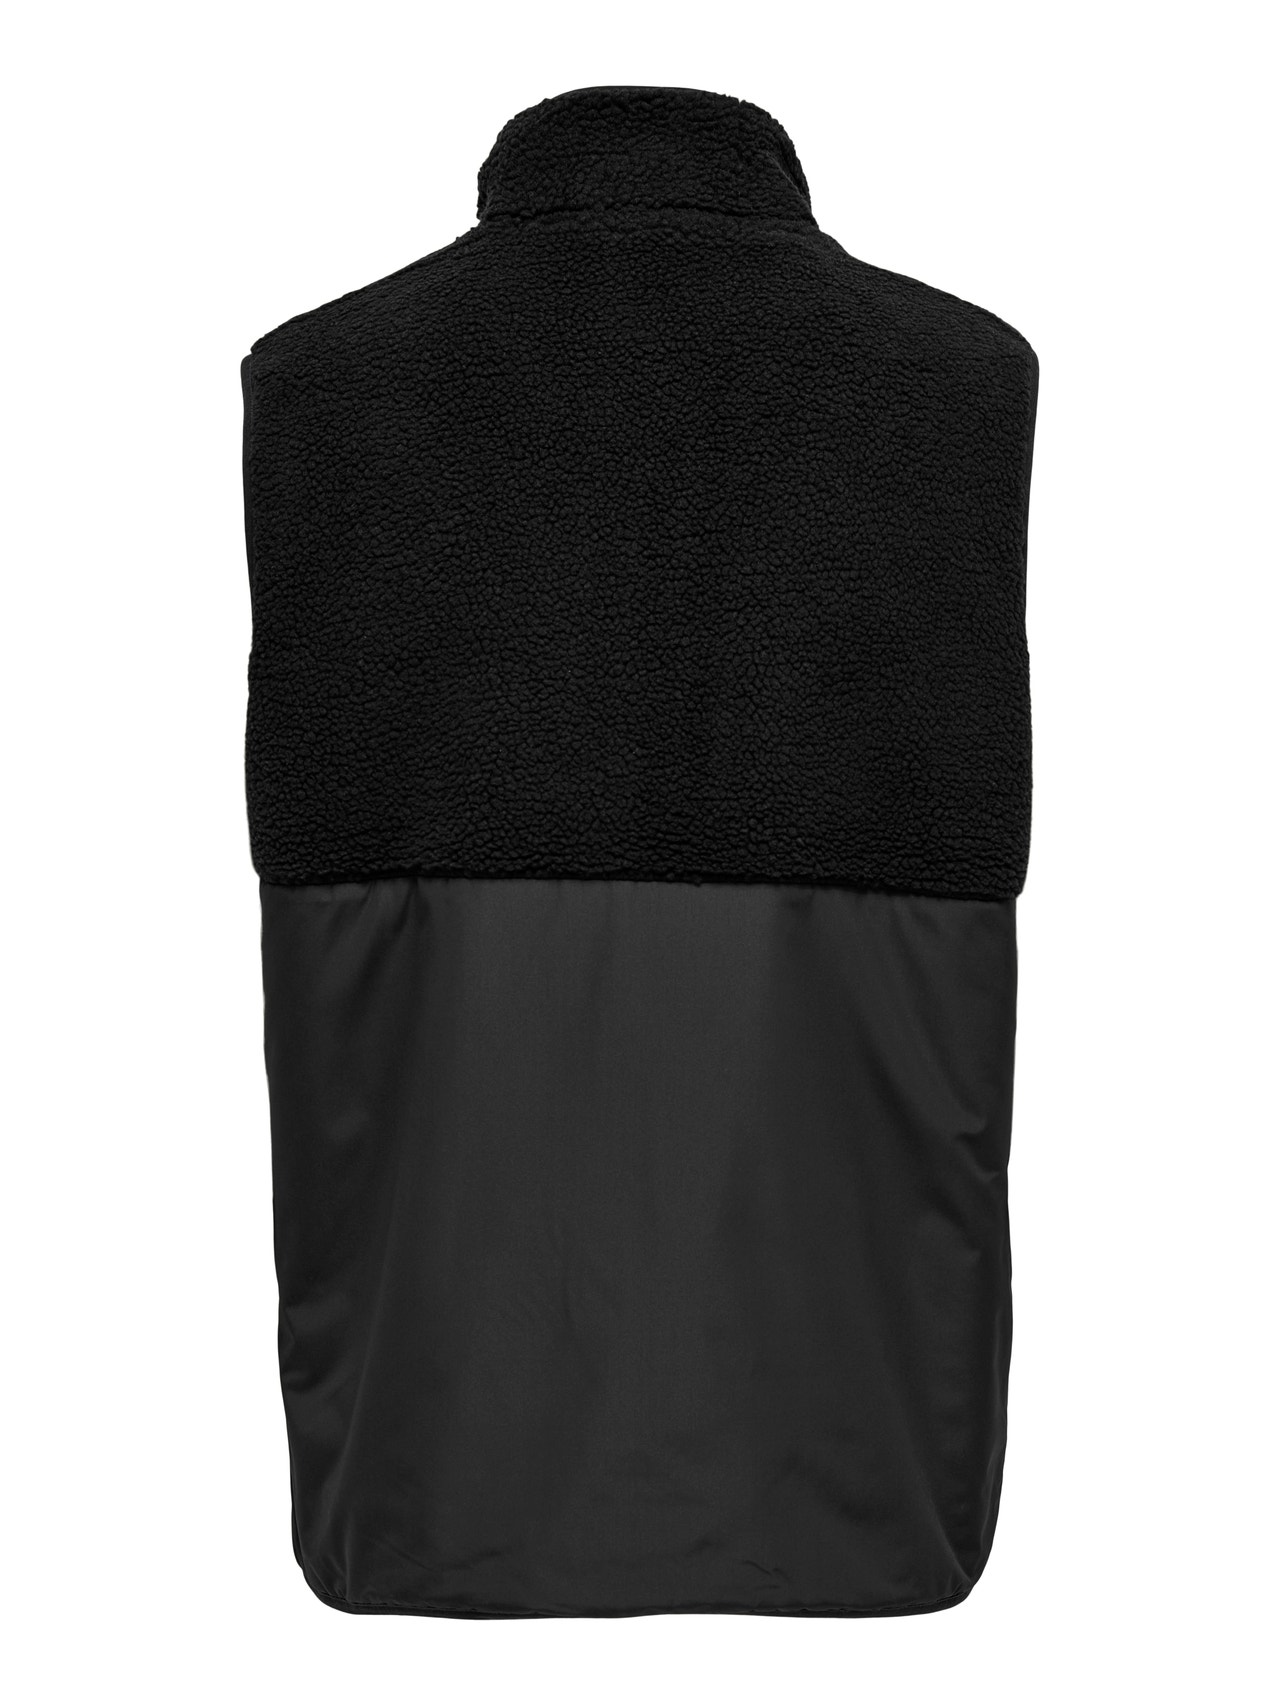 ONLY & SONS Sherpa mix waistcoat -Black - 22022513